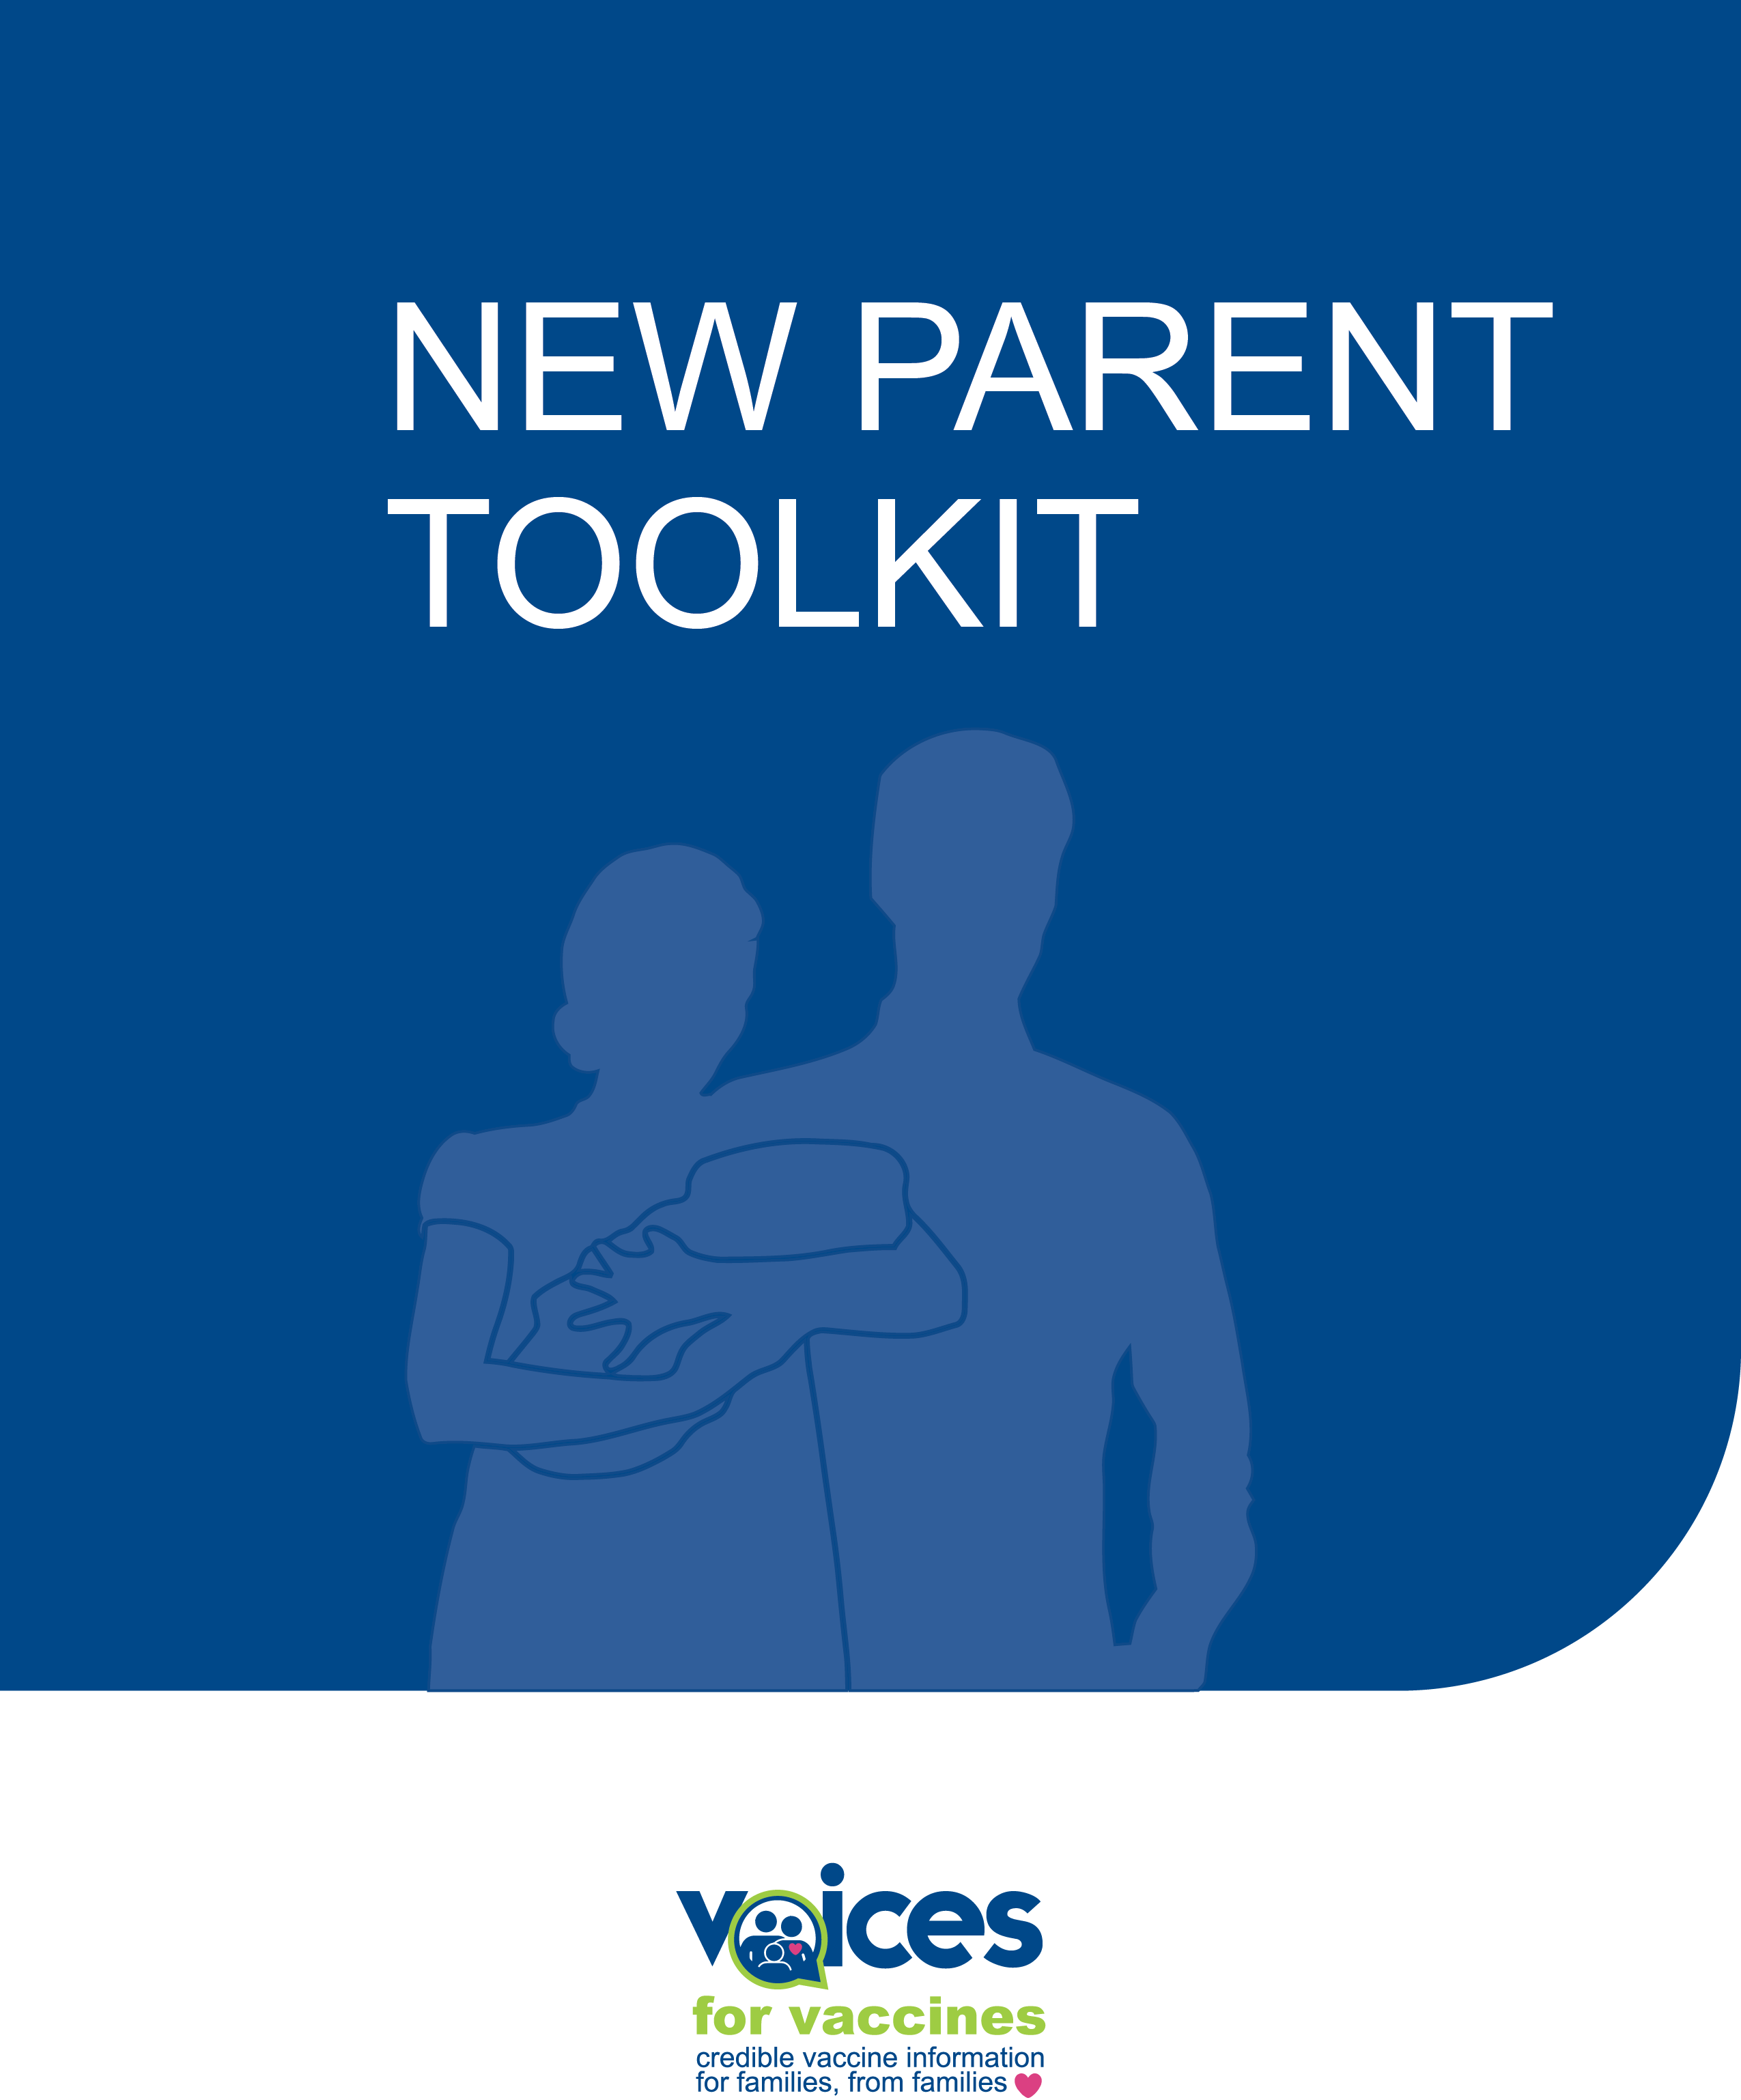 Cover page of the New Parent Toolkit